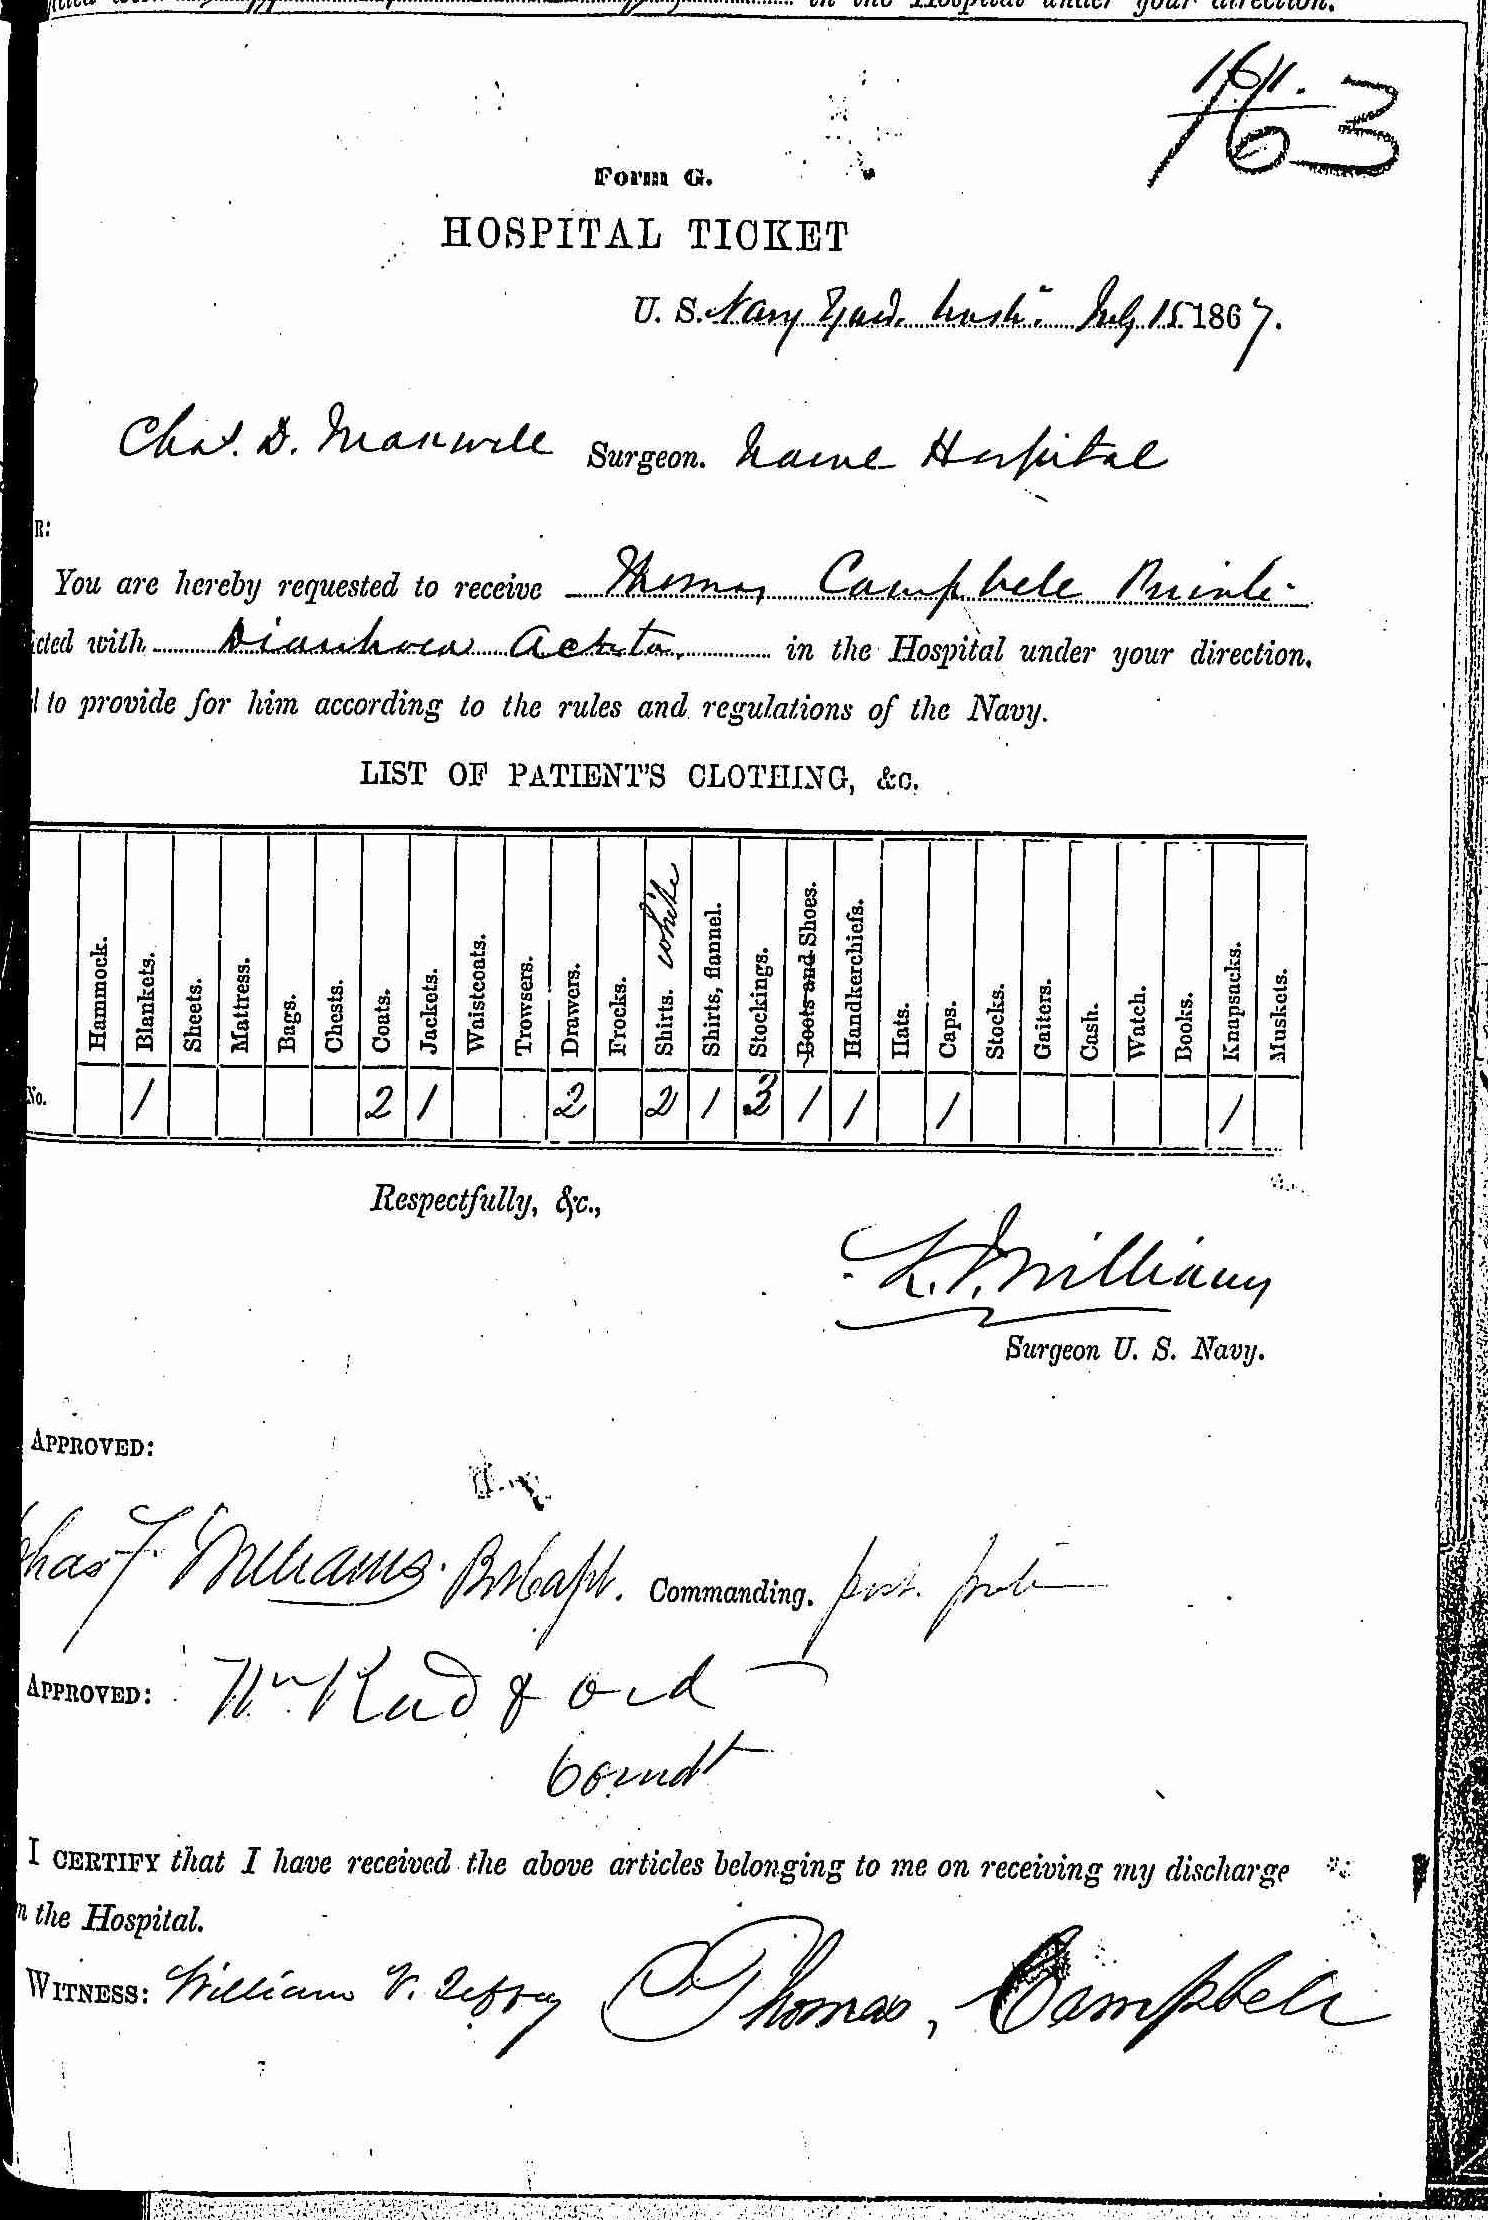 Entry for Thomas Campbell (first admission page 1 of 2) in the log Hospital Tickets and Case Papers - Naval Hospital - Washington, D.C. - 1866-68